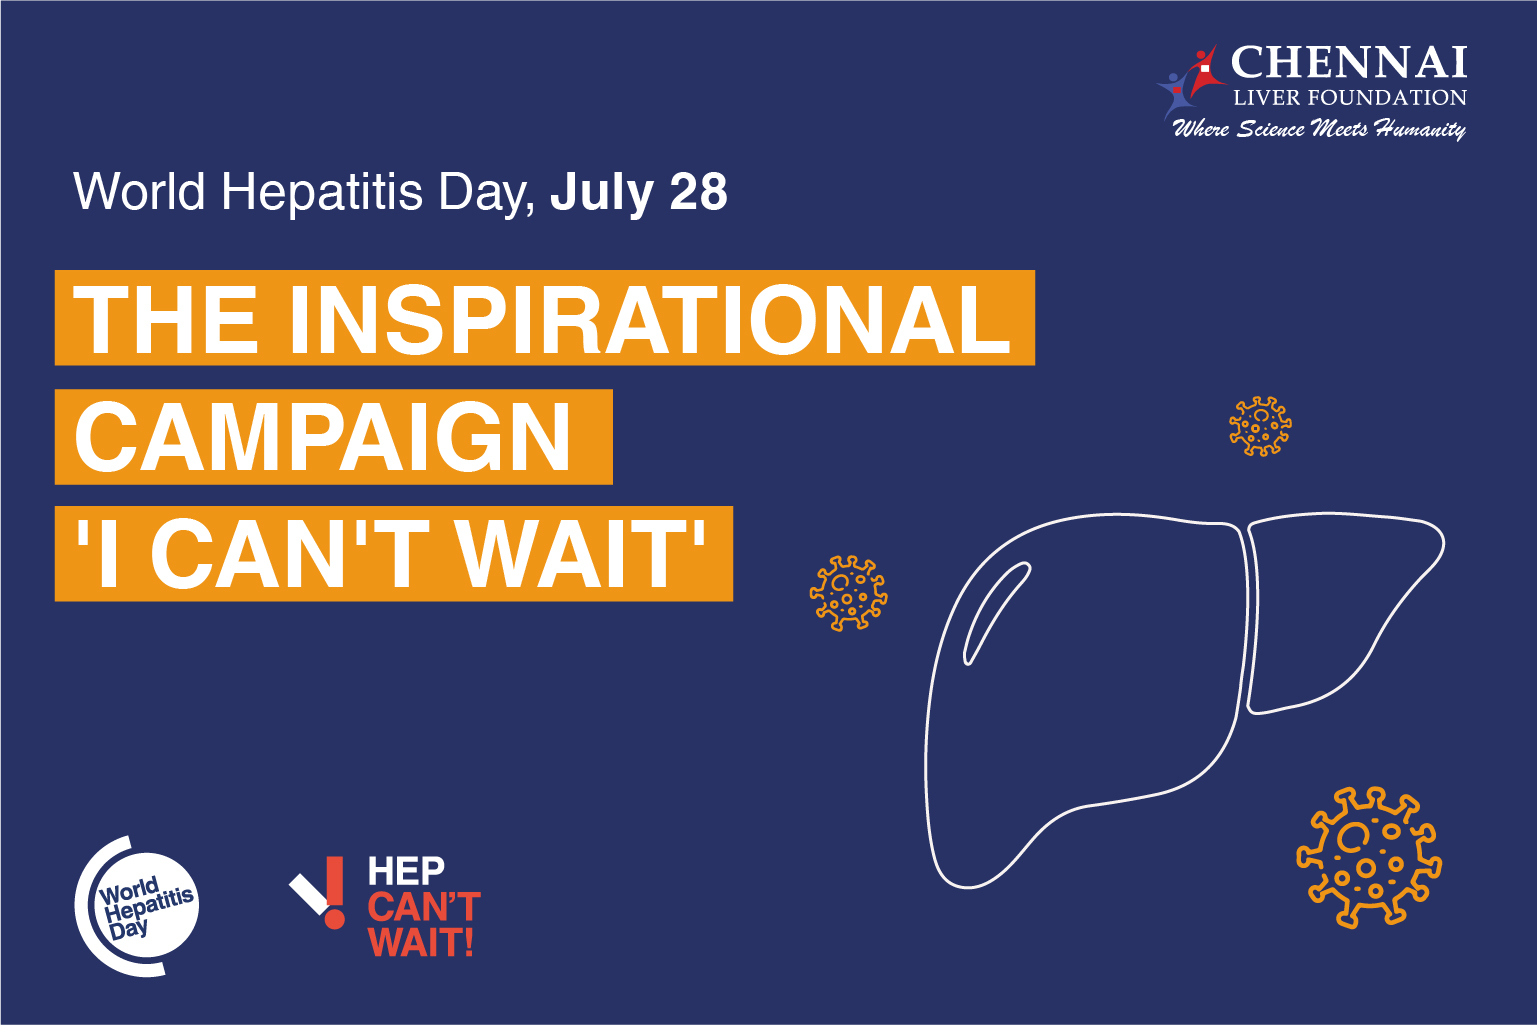 World Hepatitis Day: The Inspirational Campaign ‘I Can’t Wait